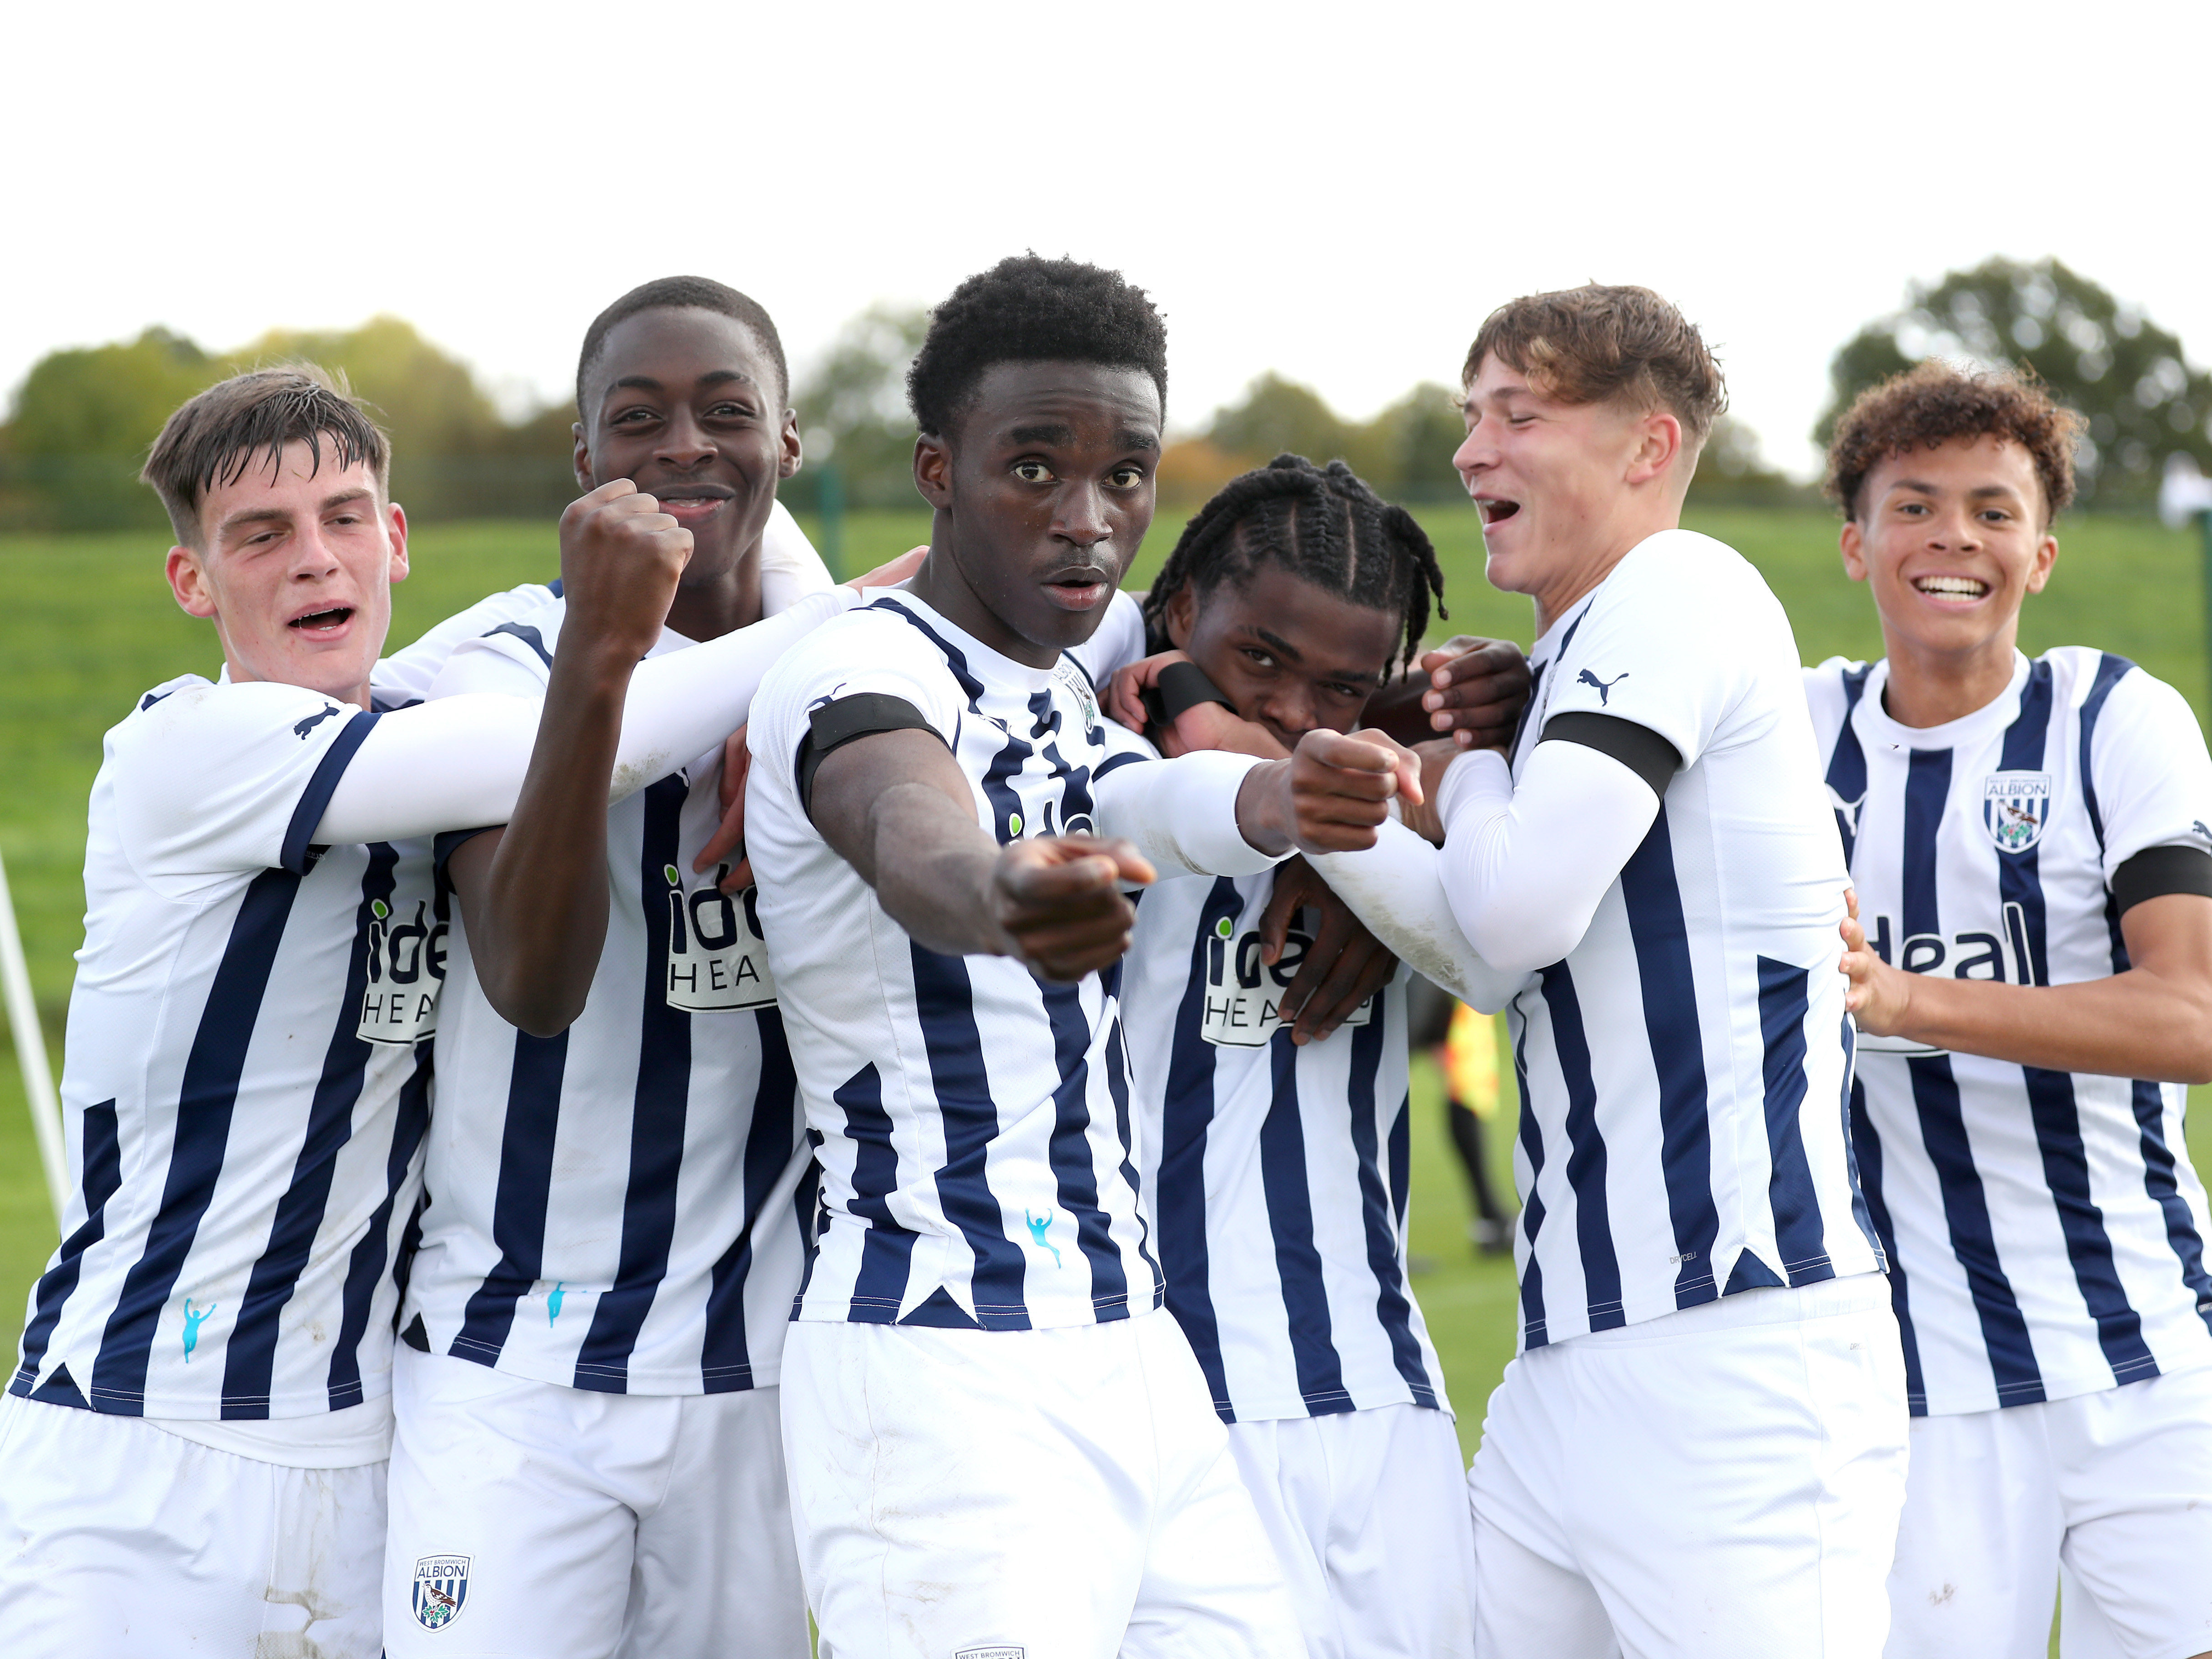 Albion Under 18s players, in the 2023/24 home kit, celebrate scoring straight down the camera in their match against West Ham at Albion's training ground